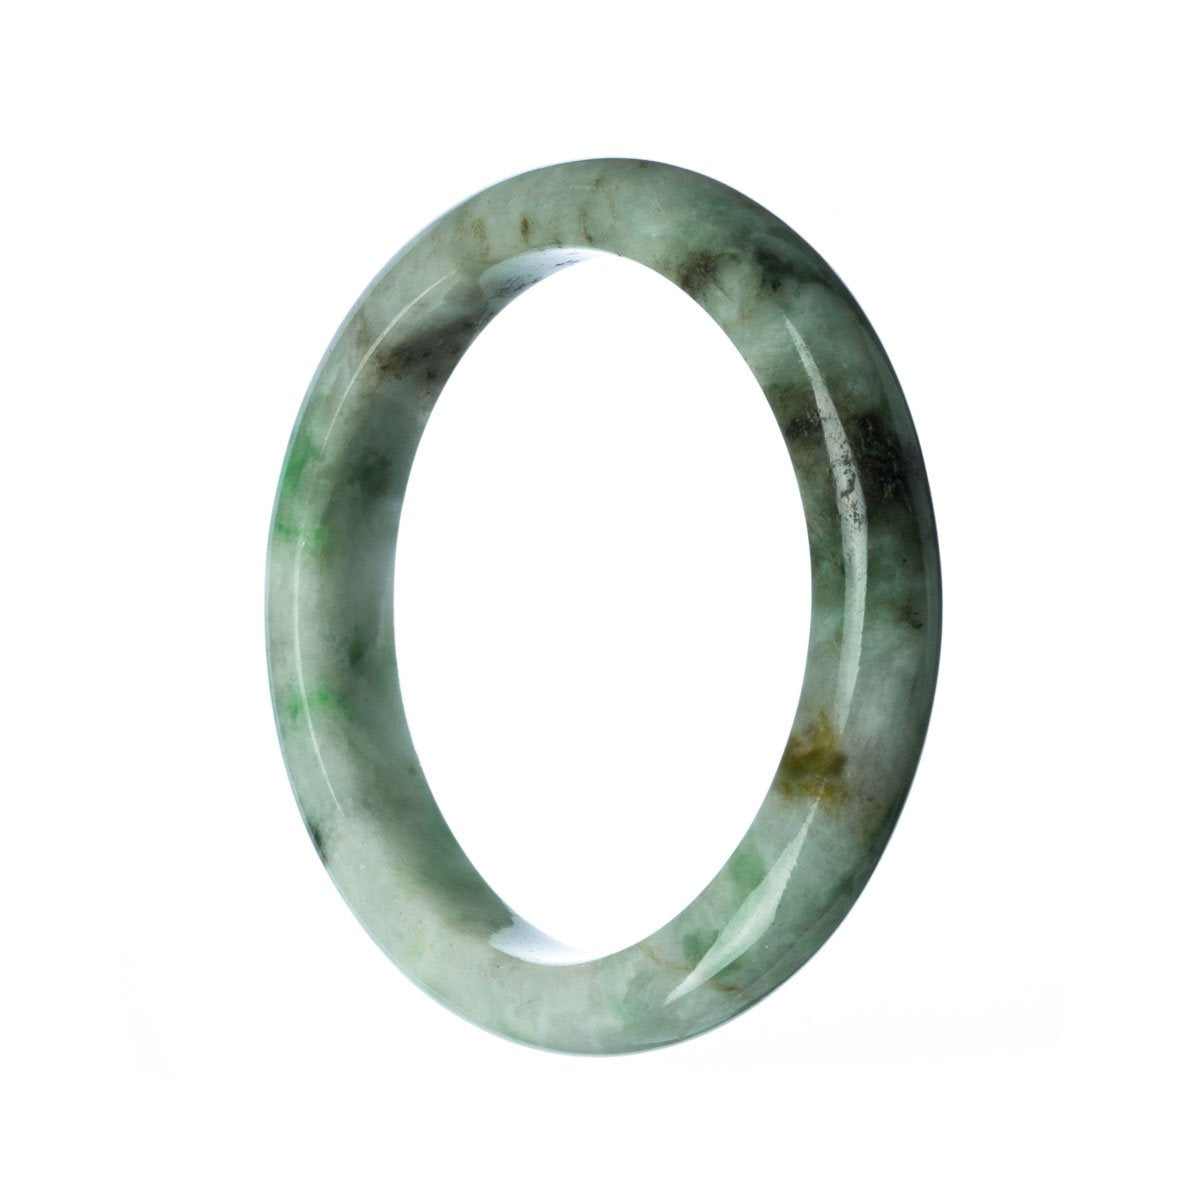 A semi-round, 59mm authentic Grade A Green Burma Jade bangle from MAYS.